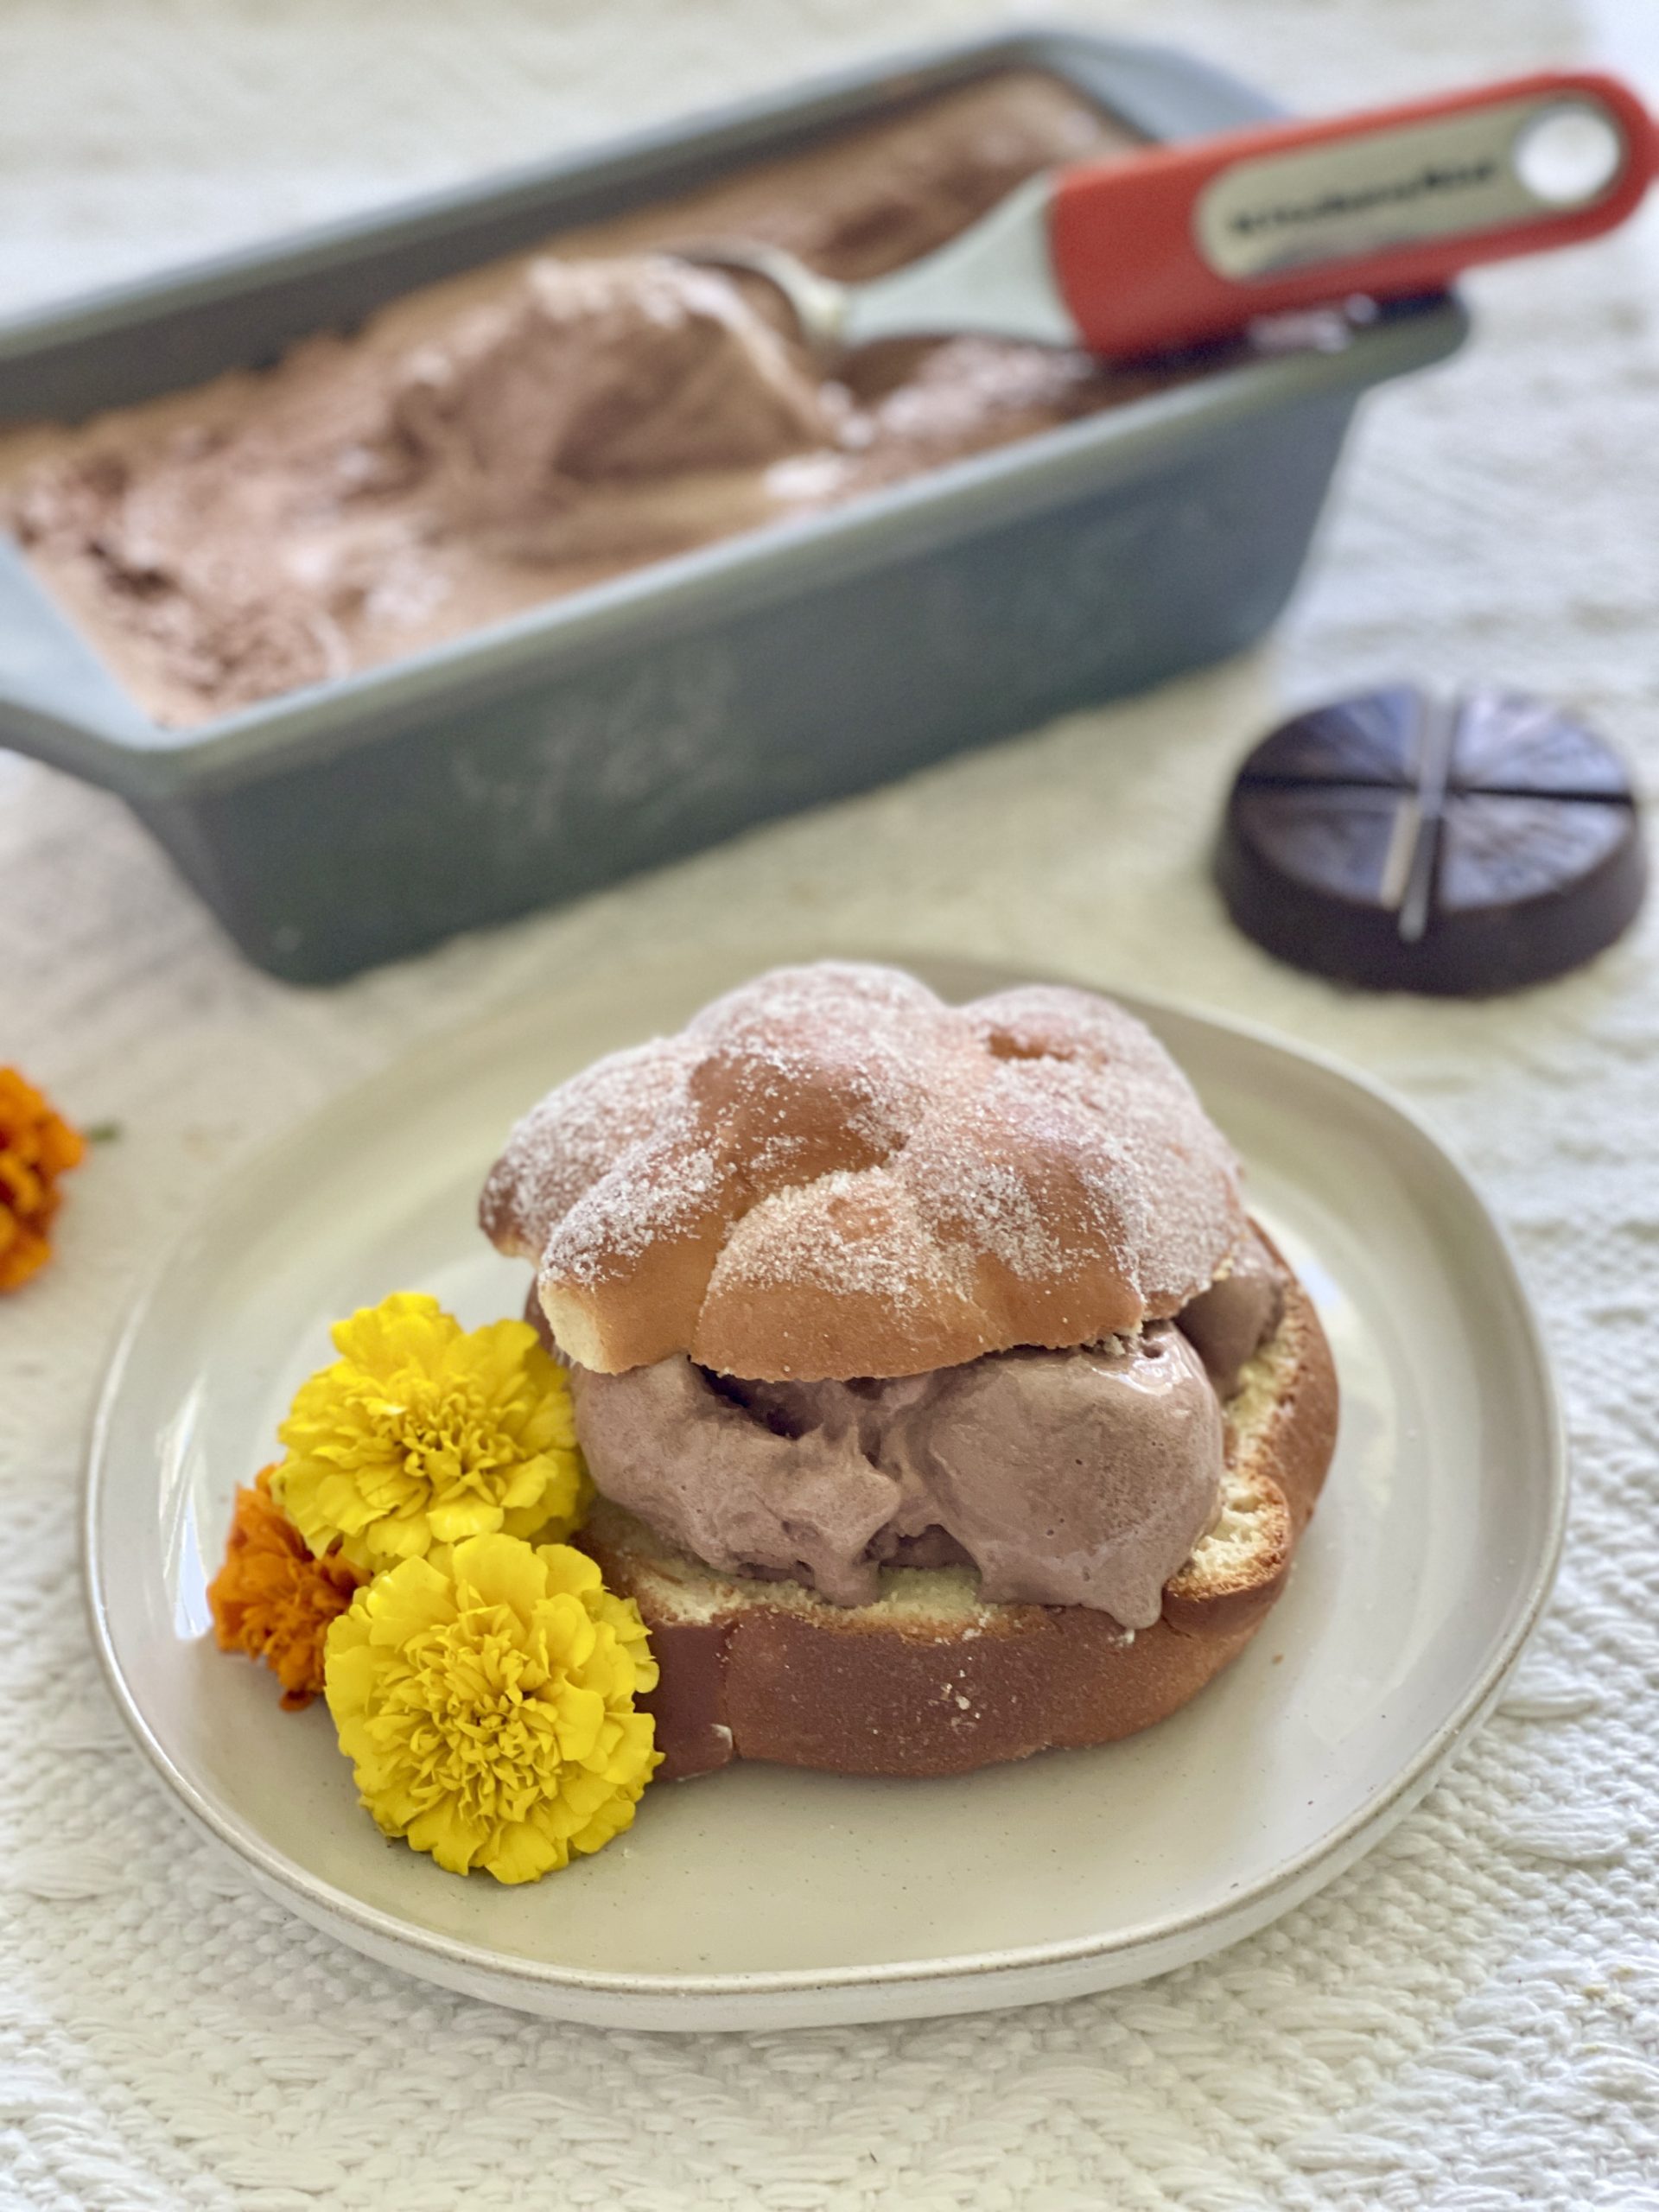 Mexican hot chocolate ice cream recipe to fill your pan de muerto for the Day of the Dead